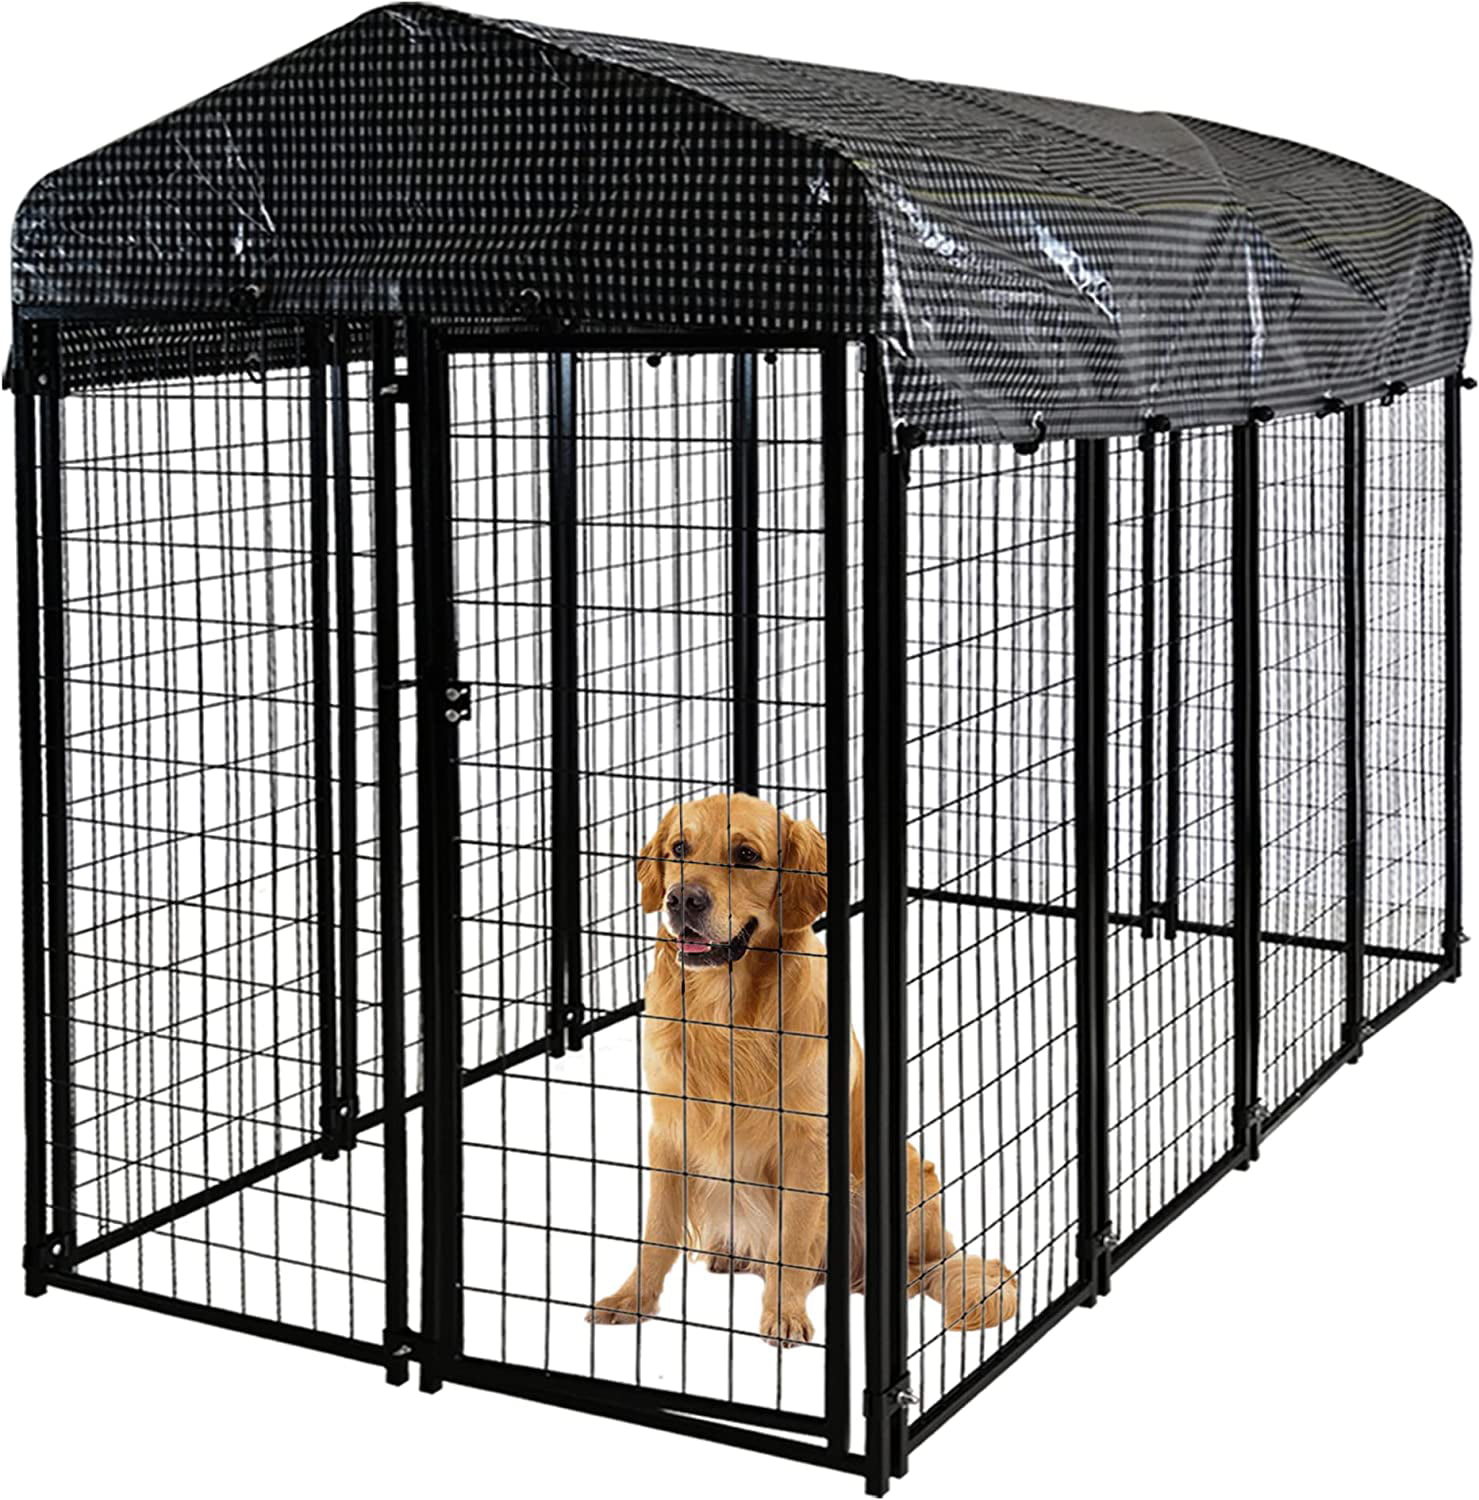 Galvanized Metal Playpen Extra Large Dog Crate Metal Welded Pet Cage Heavy Duty Playpen with UV Protection Waterproof Dog Kennel Cover Large Dog Kennel Outdoor Keeps Pet Cool Warm Dry Comfortable 